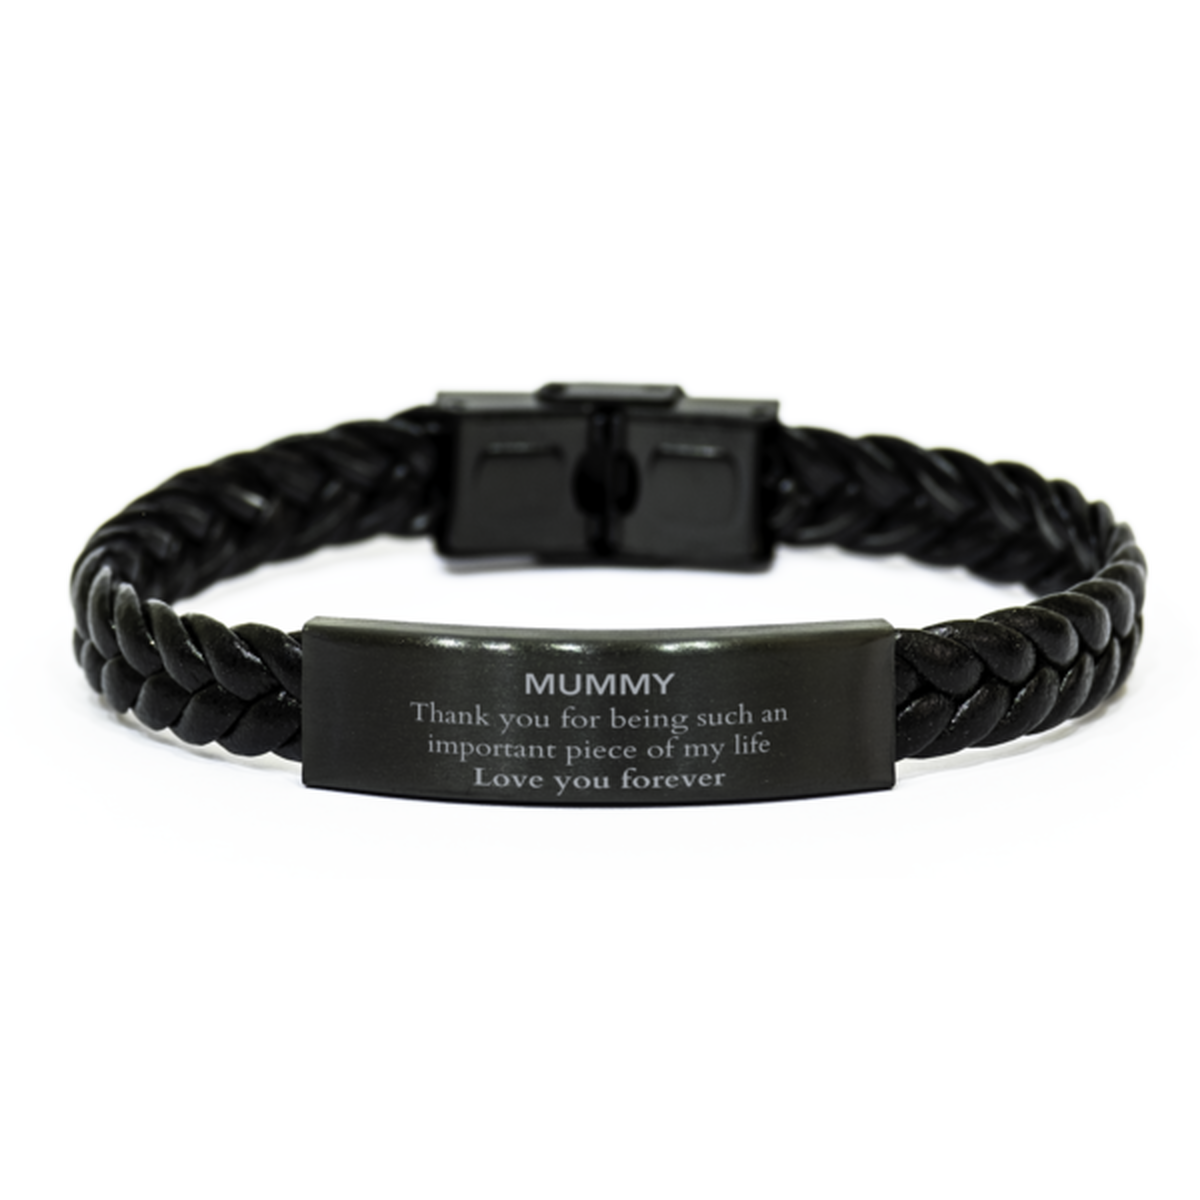 Appropriate Mummy Braided Leather Bracelet Epic Birthday Gifts for Mummy Thank you for being such an important piece of my life Mummy Christmas Mothers Fathers Day